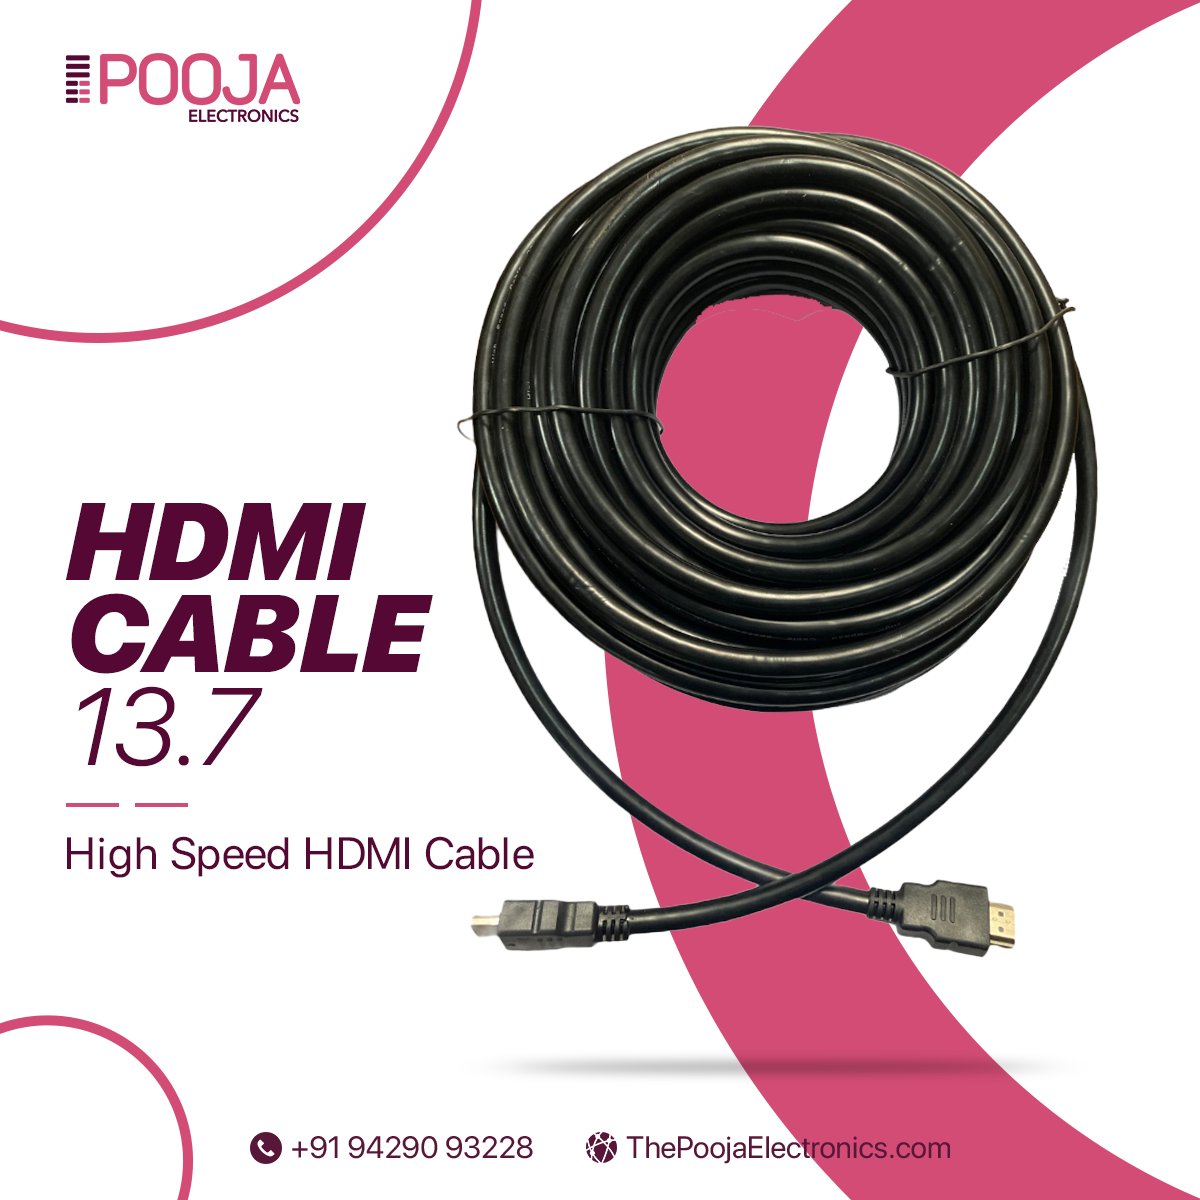 Don't compromise on quality. Transform your viewing experience with our high-speed
HDMI cables.
.
#poojaelectronics #HDMICables #HighDefinition #Connectivity #AudioVideo #HomeTheater
#Entertainment #TechAccessories #DigitalConnections #TrustedRepairs #audiovisualsolutions